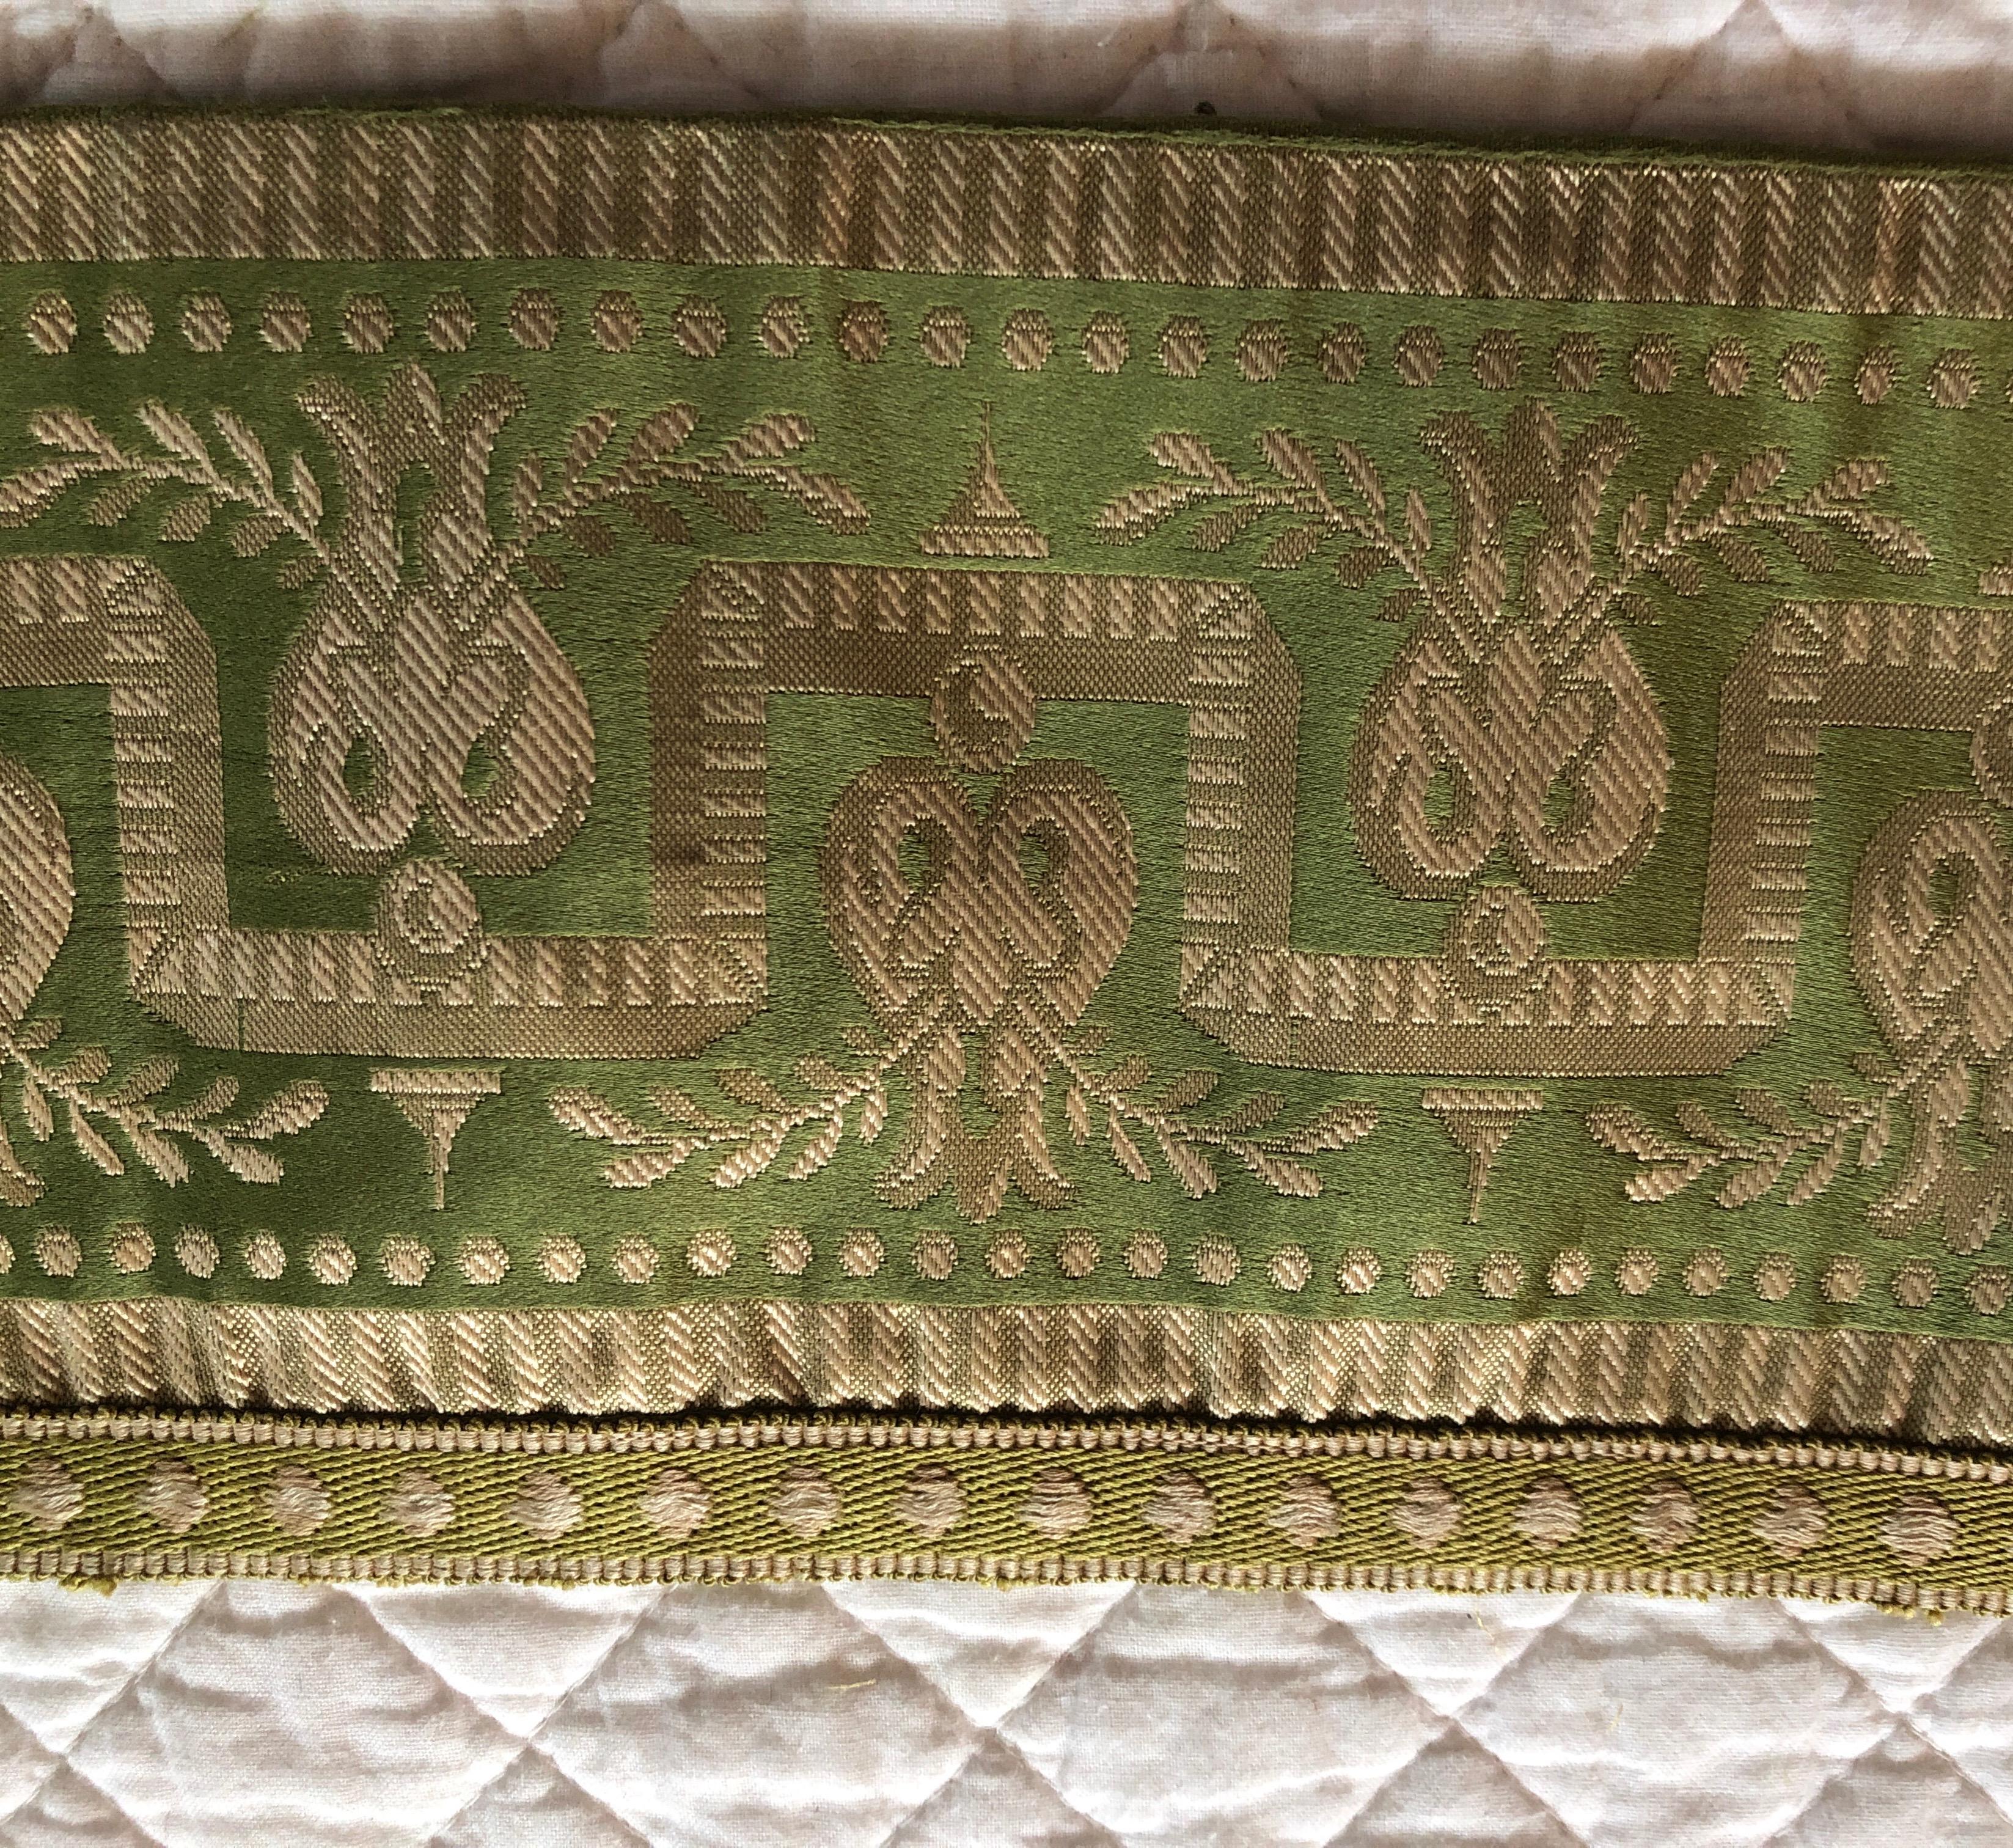 Antique gold and green Greek key pattern woven silk decorative trims.
With gimp trim attached and lined with Kelly green silk.
Sold as is. Ideal for pillows and upholstery.
Will make great curtains trim or tiebacks.
Size: 5